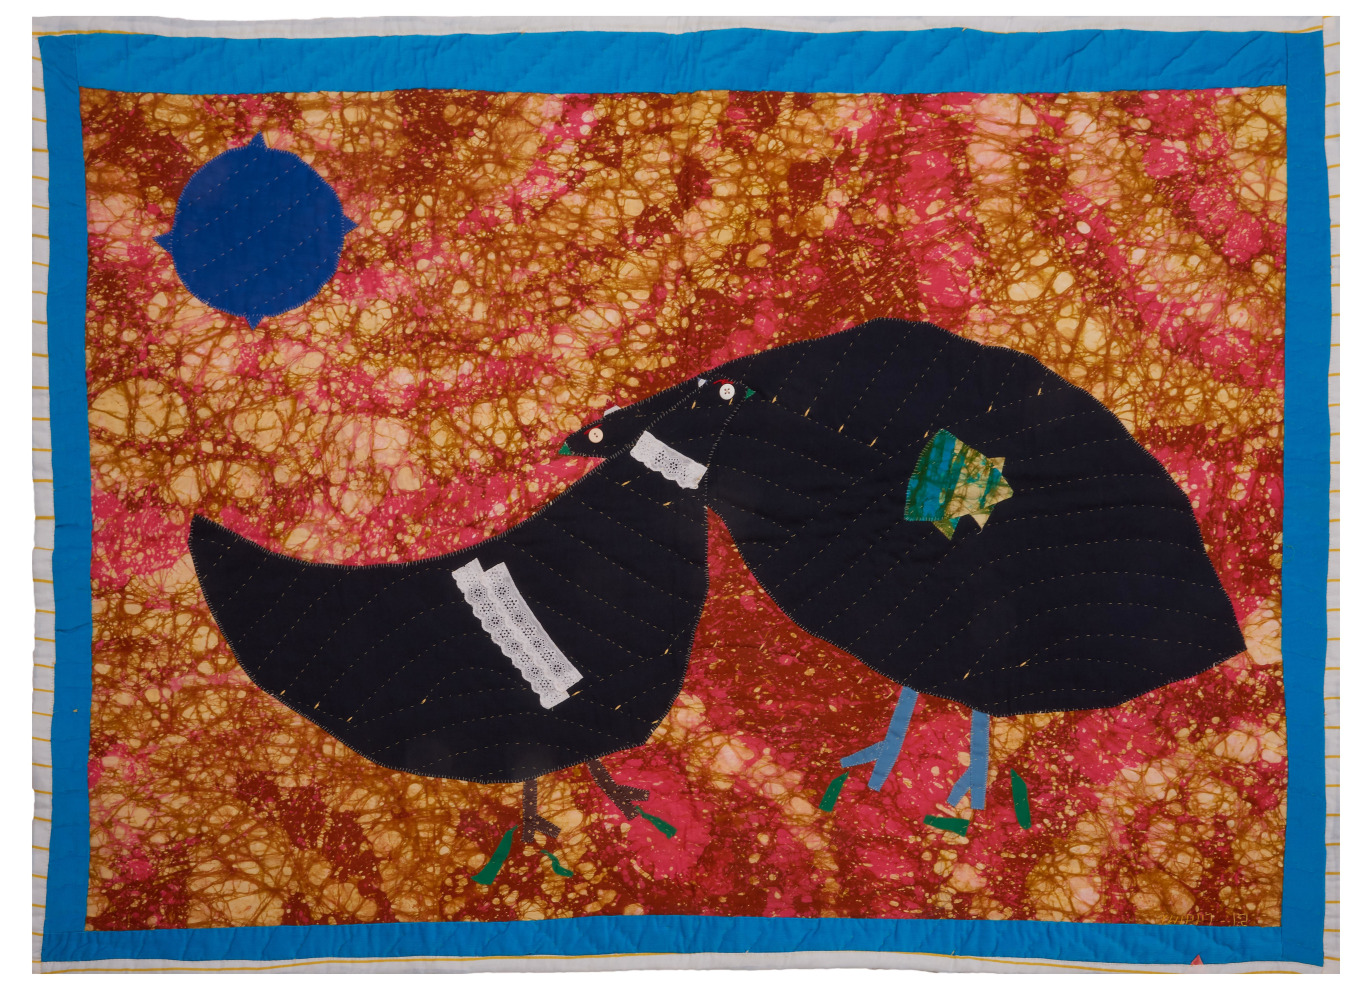 A quilt of two identical chickens embracing